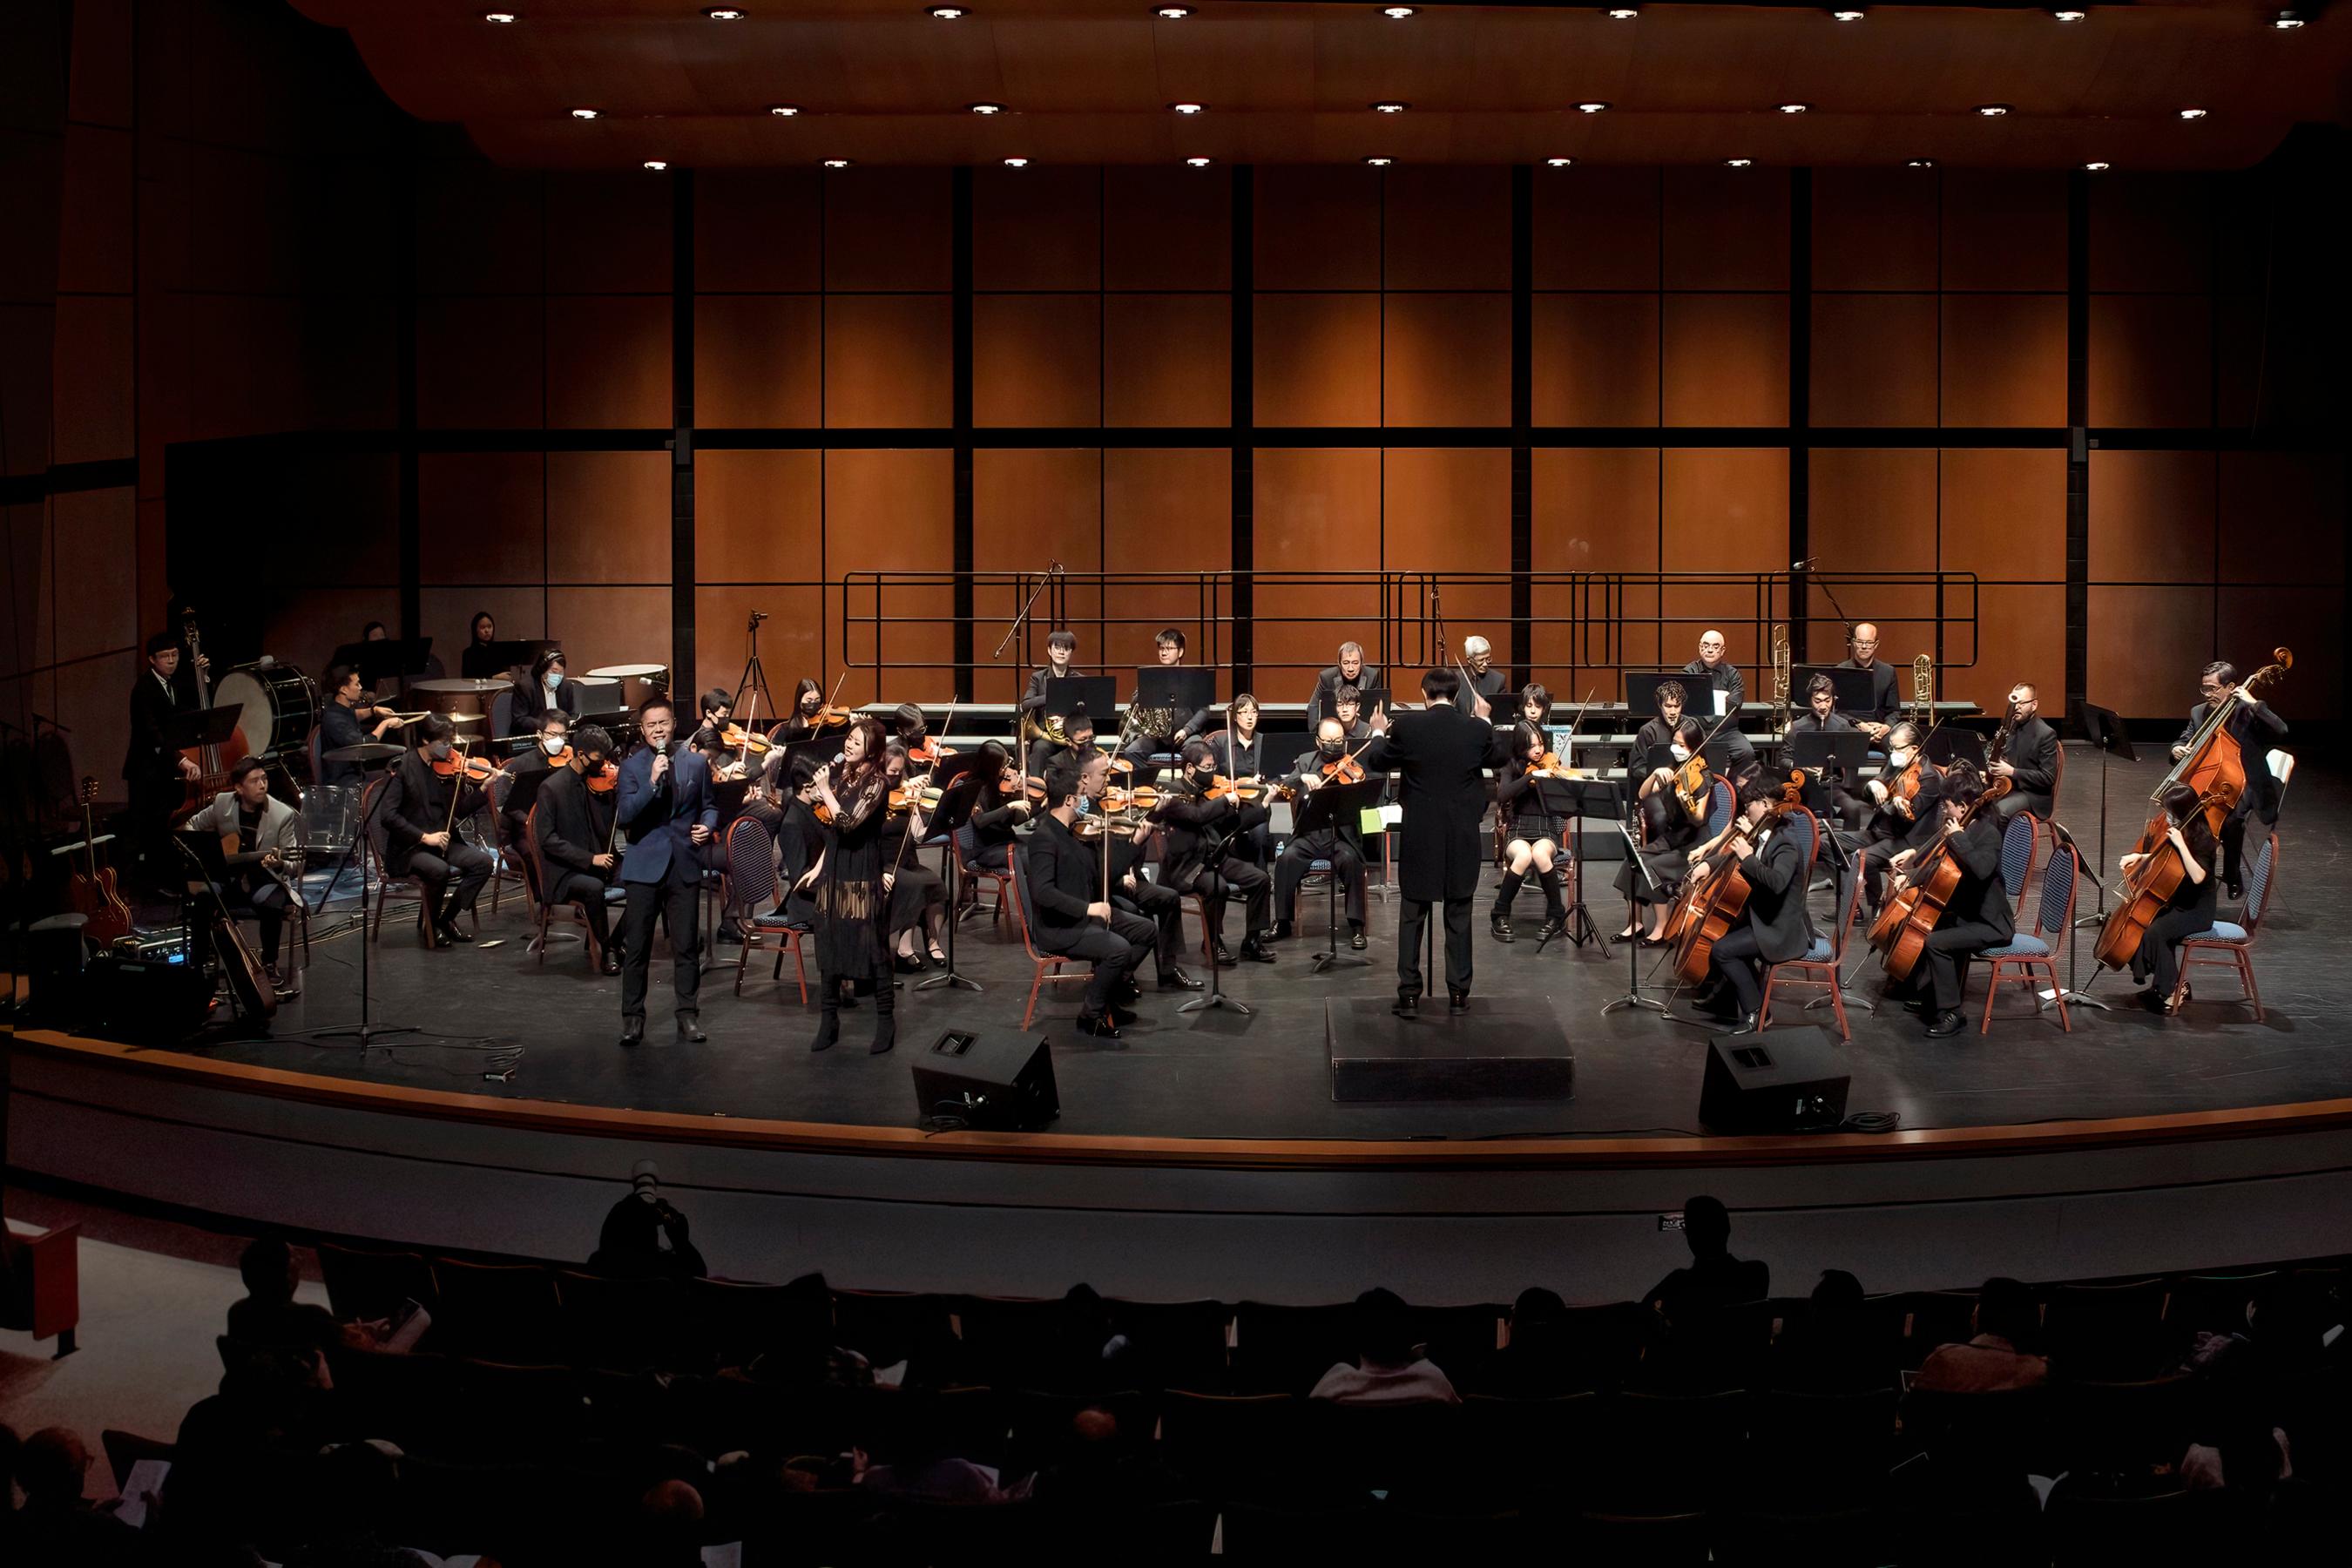 The Hong Kong Economic and Trade Office (Toronto) supported the concert titled "Dawn" at P.C. Ho Theatre of the Chinese Cultural Centre of Greater Toronto in Toronto on October 16 (Toronto time) to showcase the close cultural ties between Hong Kong and Canada. Photo shows over 60 symphony orchestra and choir members from the Ontario Cross-Cultural Music Society at stage lead by conductor Mr Ken Zheng (front row, first right) and joined by singers Ms Wendyz Zheng (front row, second left) and Mr Roger Feng (front row, first left).